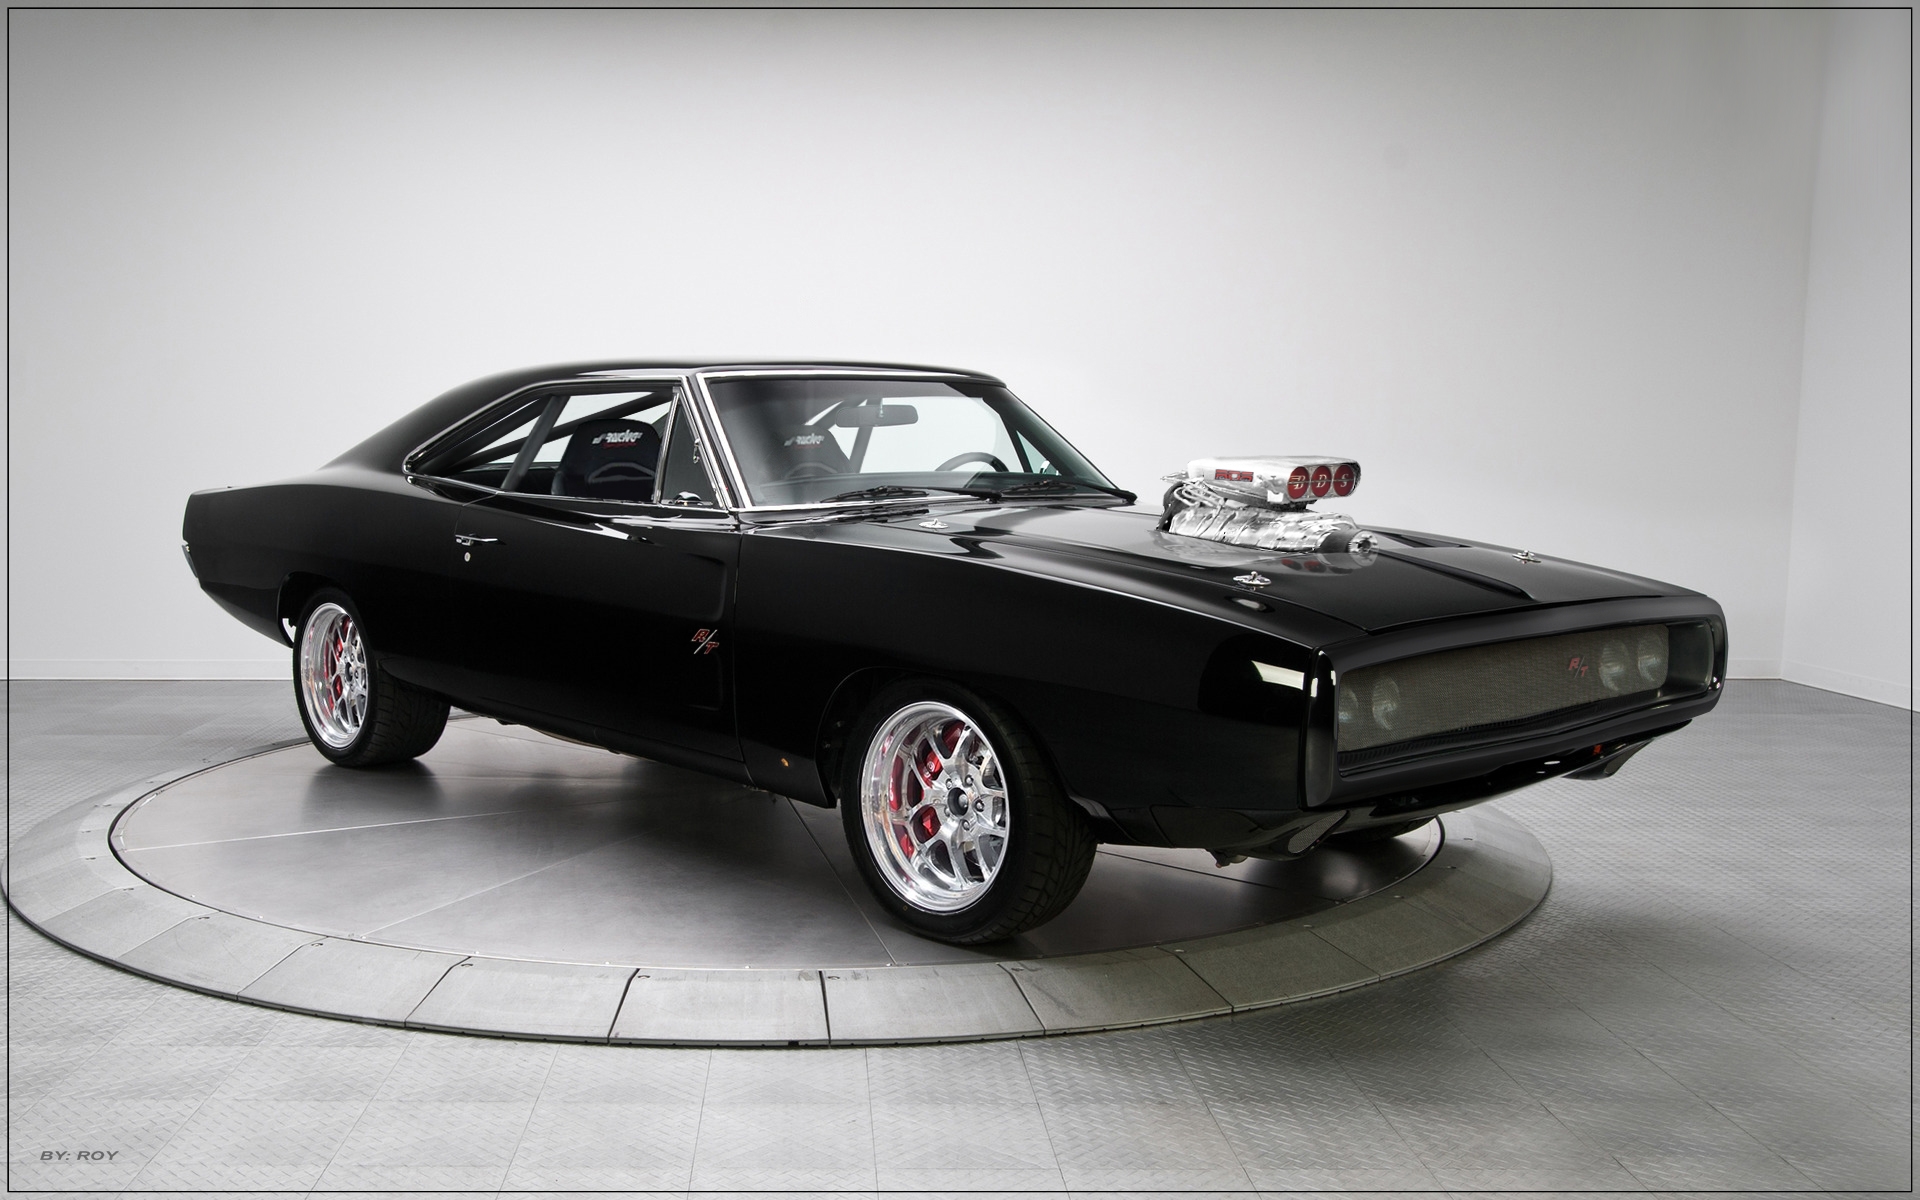 Free download 1970 Doms Dodge Charger RT by 212thTrooper [1920x1200] for your Desktop, Mobile & Tablet. Explore 1970 Dodge Charger RT Wallpaper Dodge Charger Wallpaper, 1970 Dodge Charger Wallpaper, Dodge Charger Wallpaper Full Screen